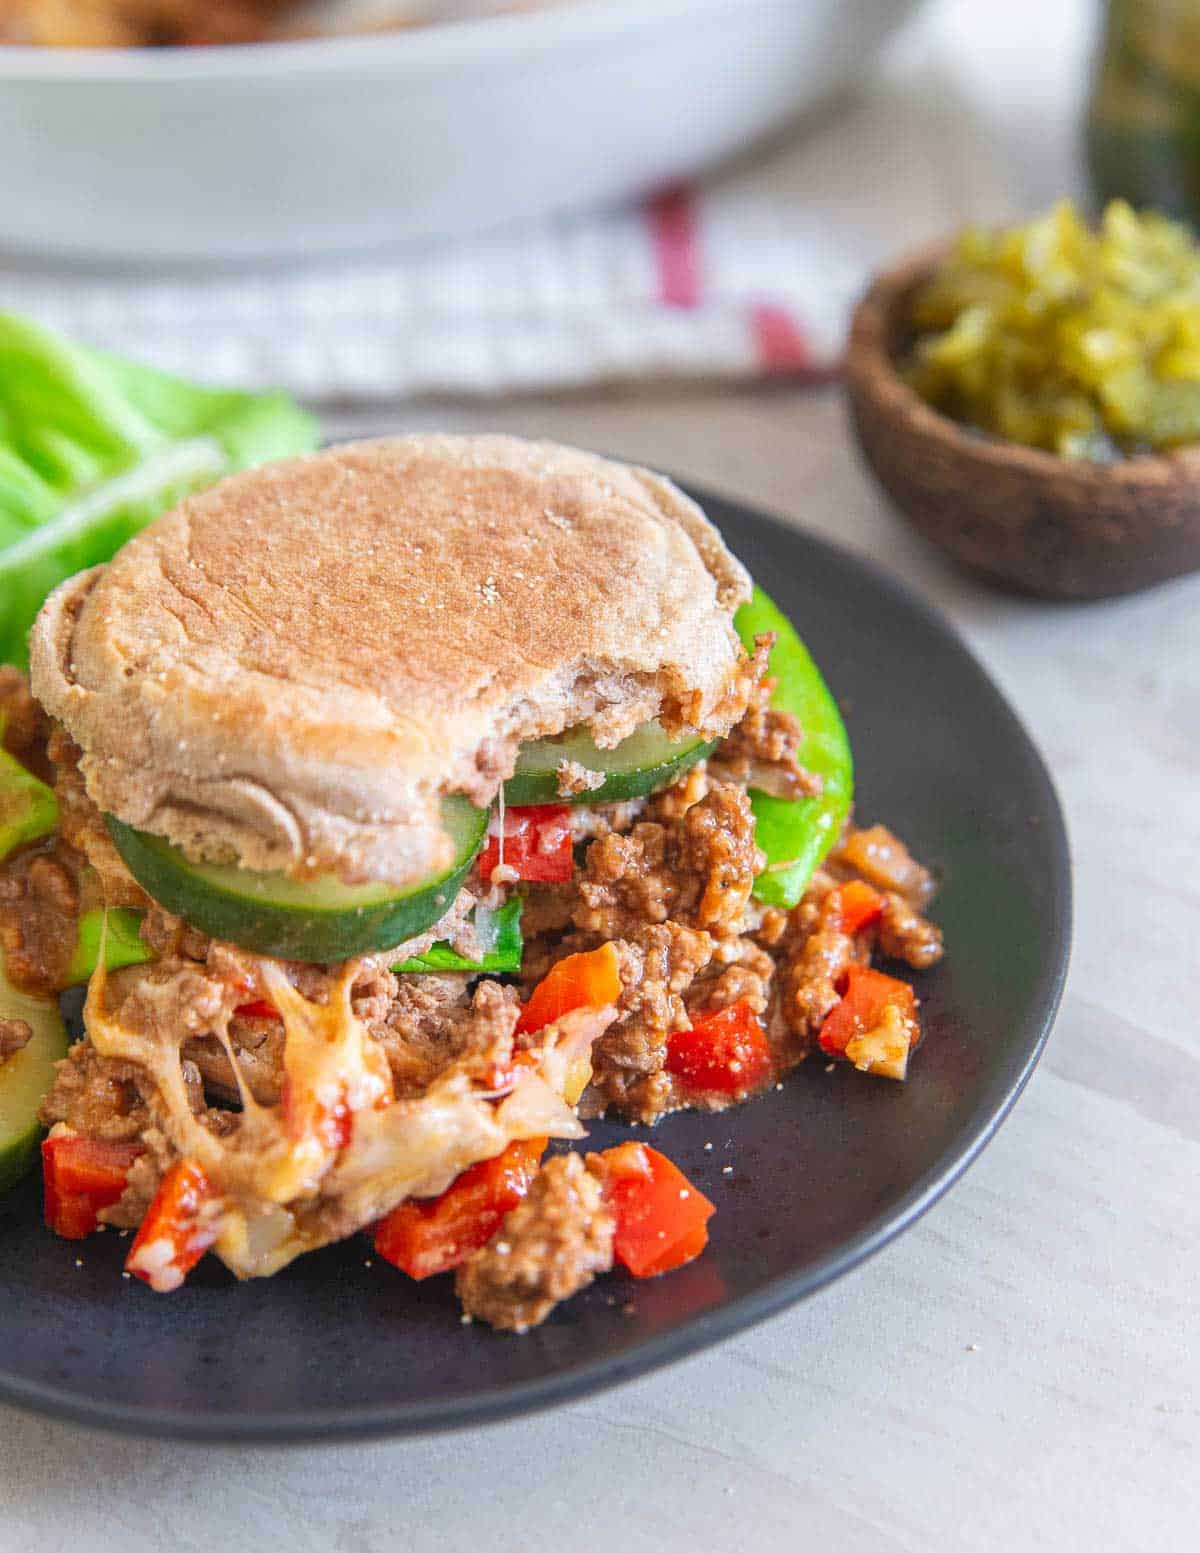 These Healthy Sloppy Joes are made with lean ground beef, low-sugar ketchup and BBQ sauce and low-fat cheese. The indulgent recipe you crave without the guilt.